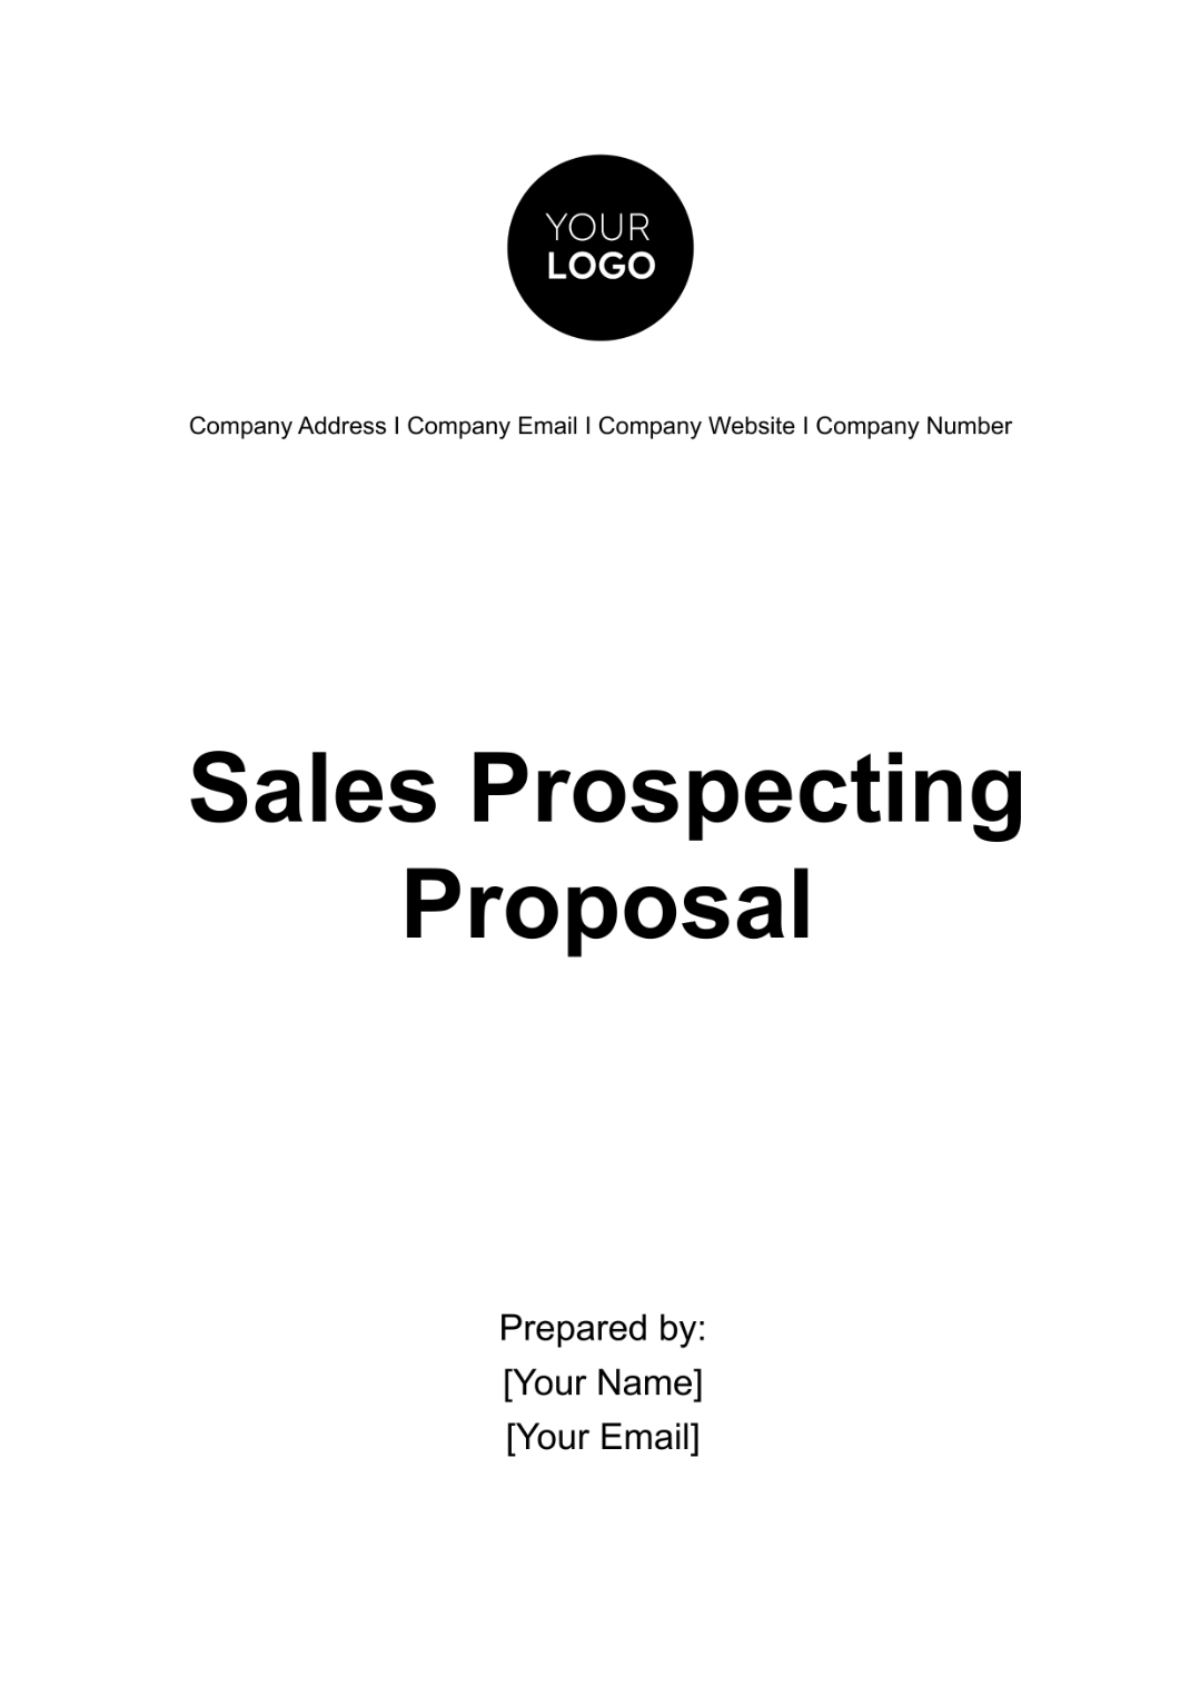 Free Sales Prospecting Proposal Template